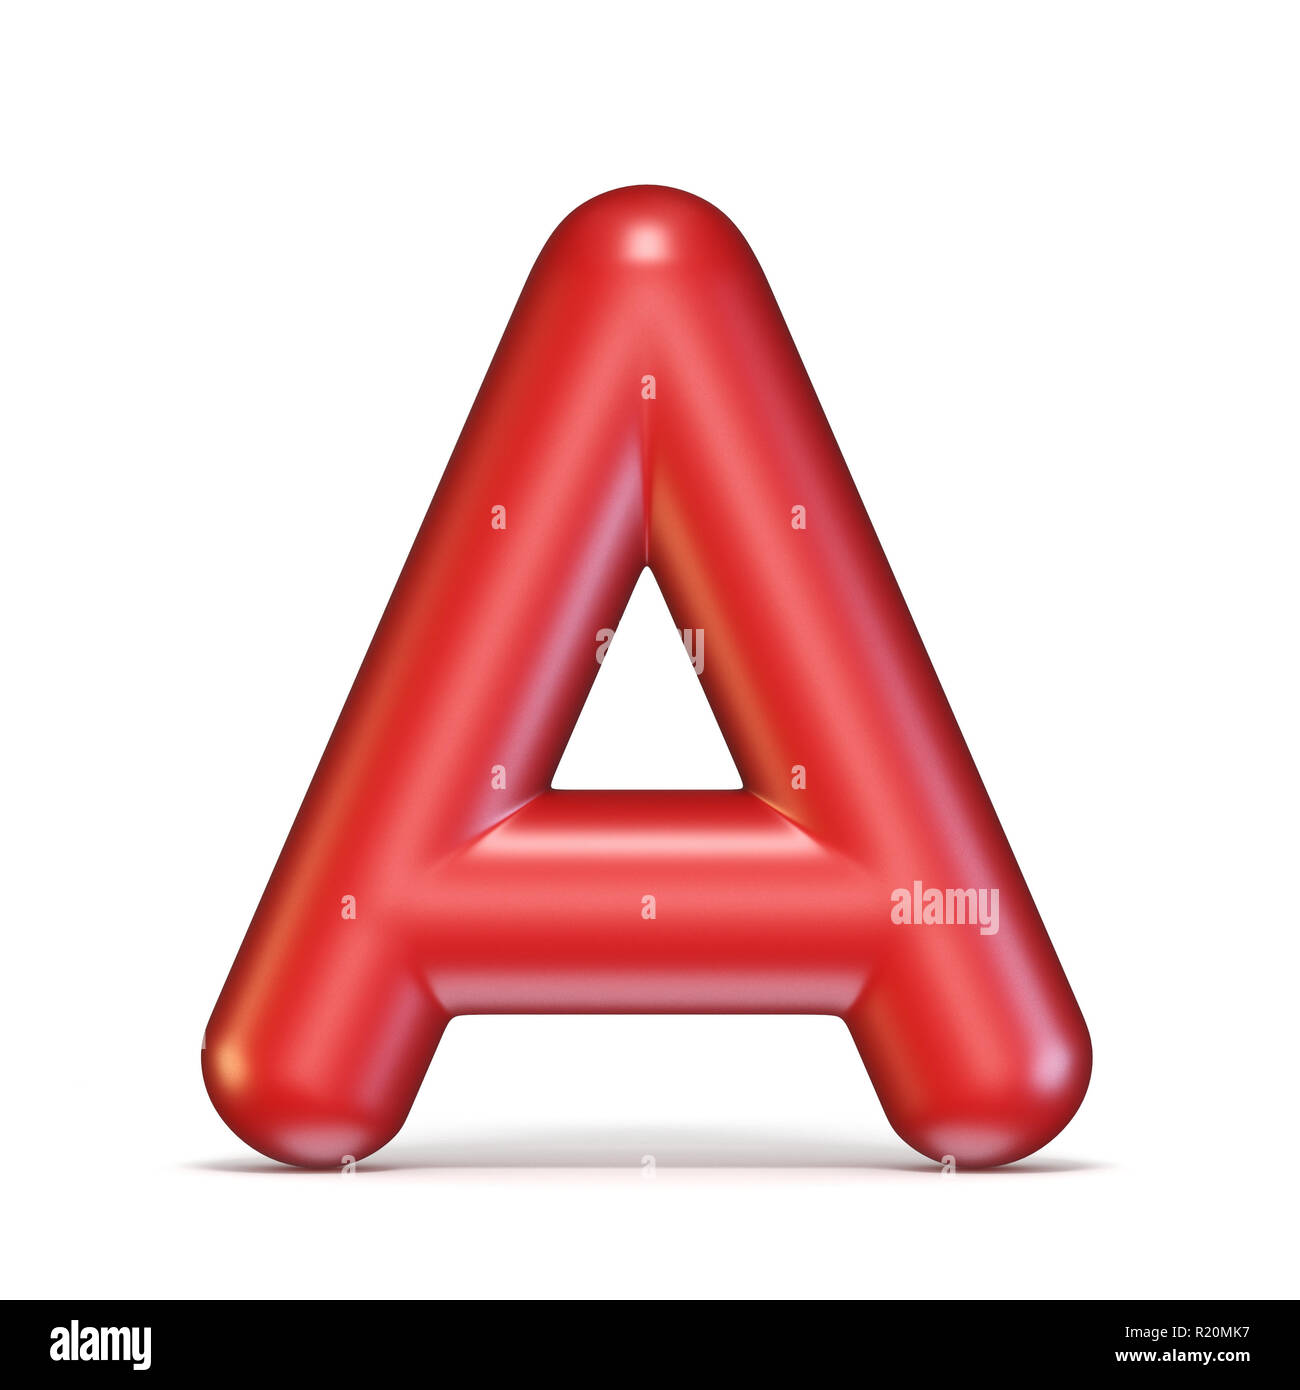 Red glossy font Letter A 3D rendering illustration isolated on white background Stock Photo